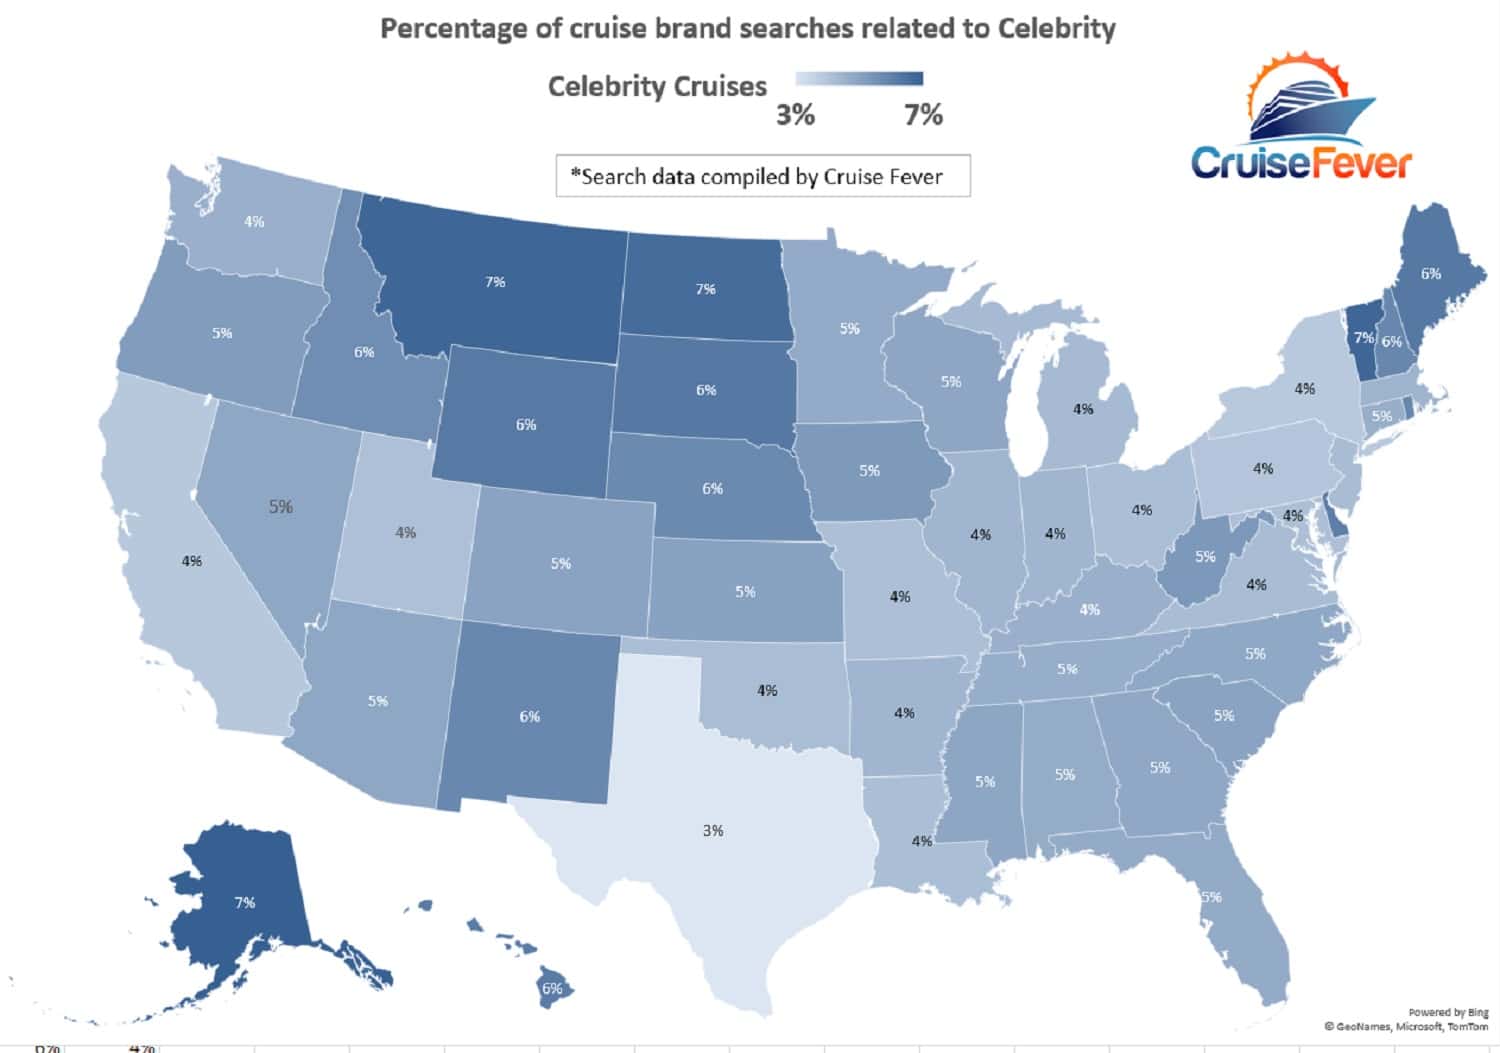 US map showing where searches are being made for Celebrity cruises